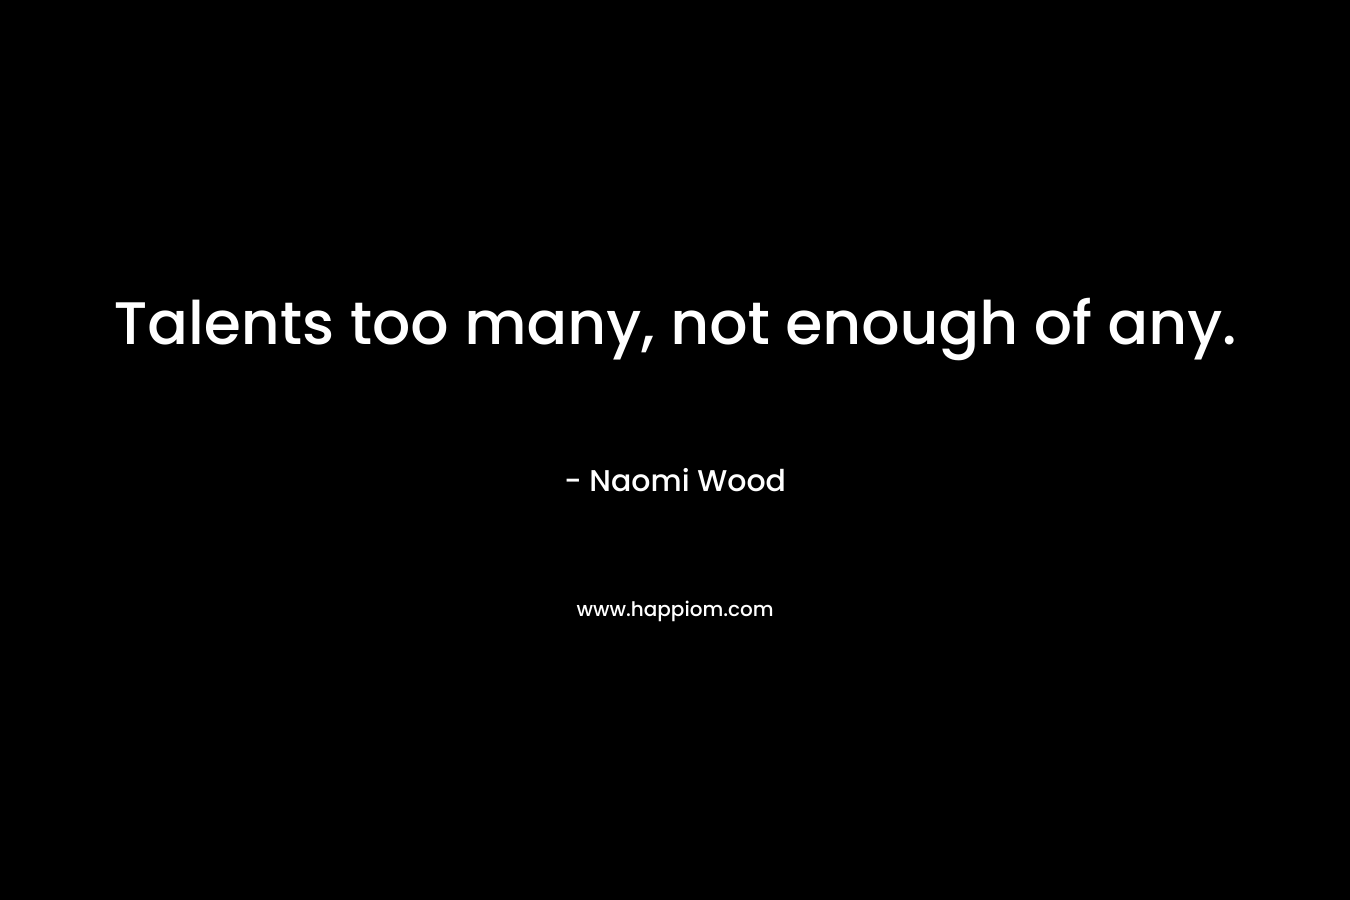 Talents too many, not enough of any. – Naomi Wood